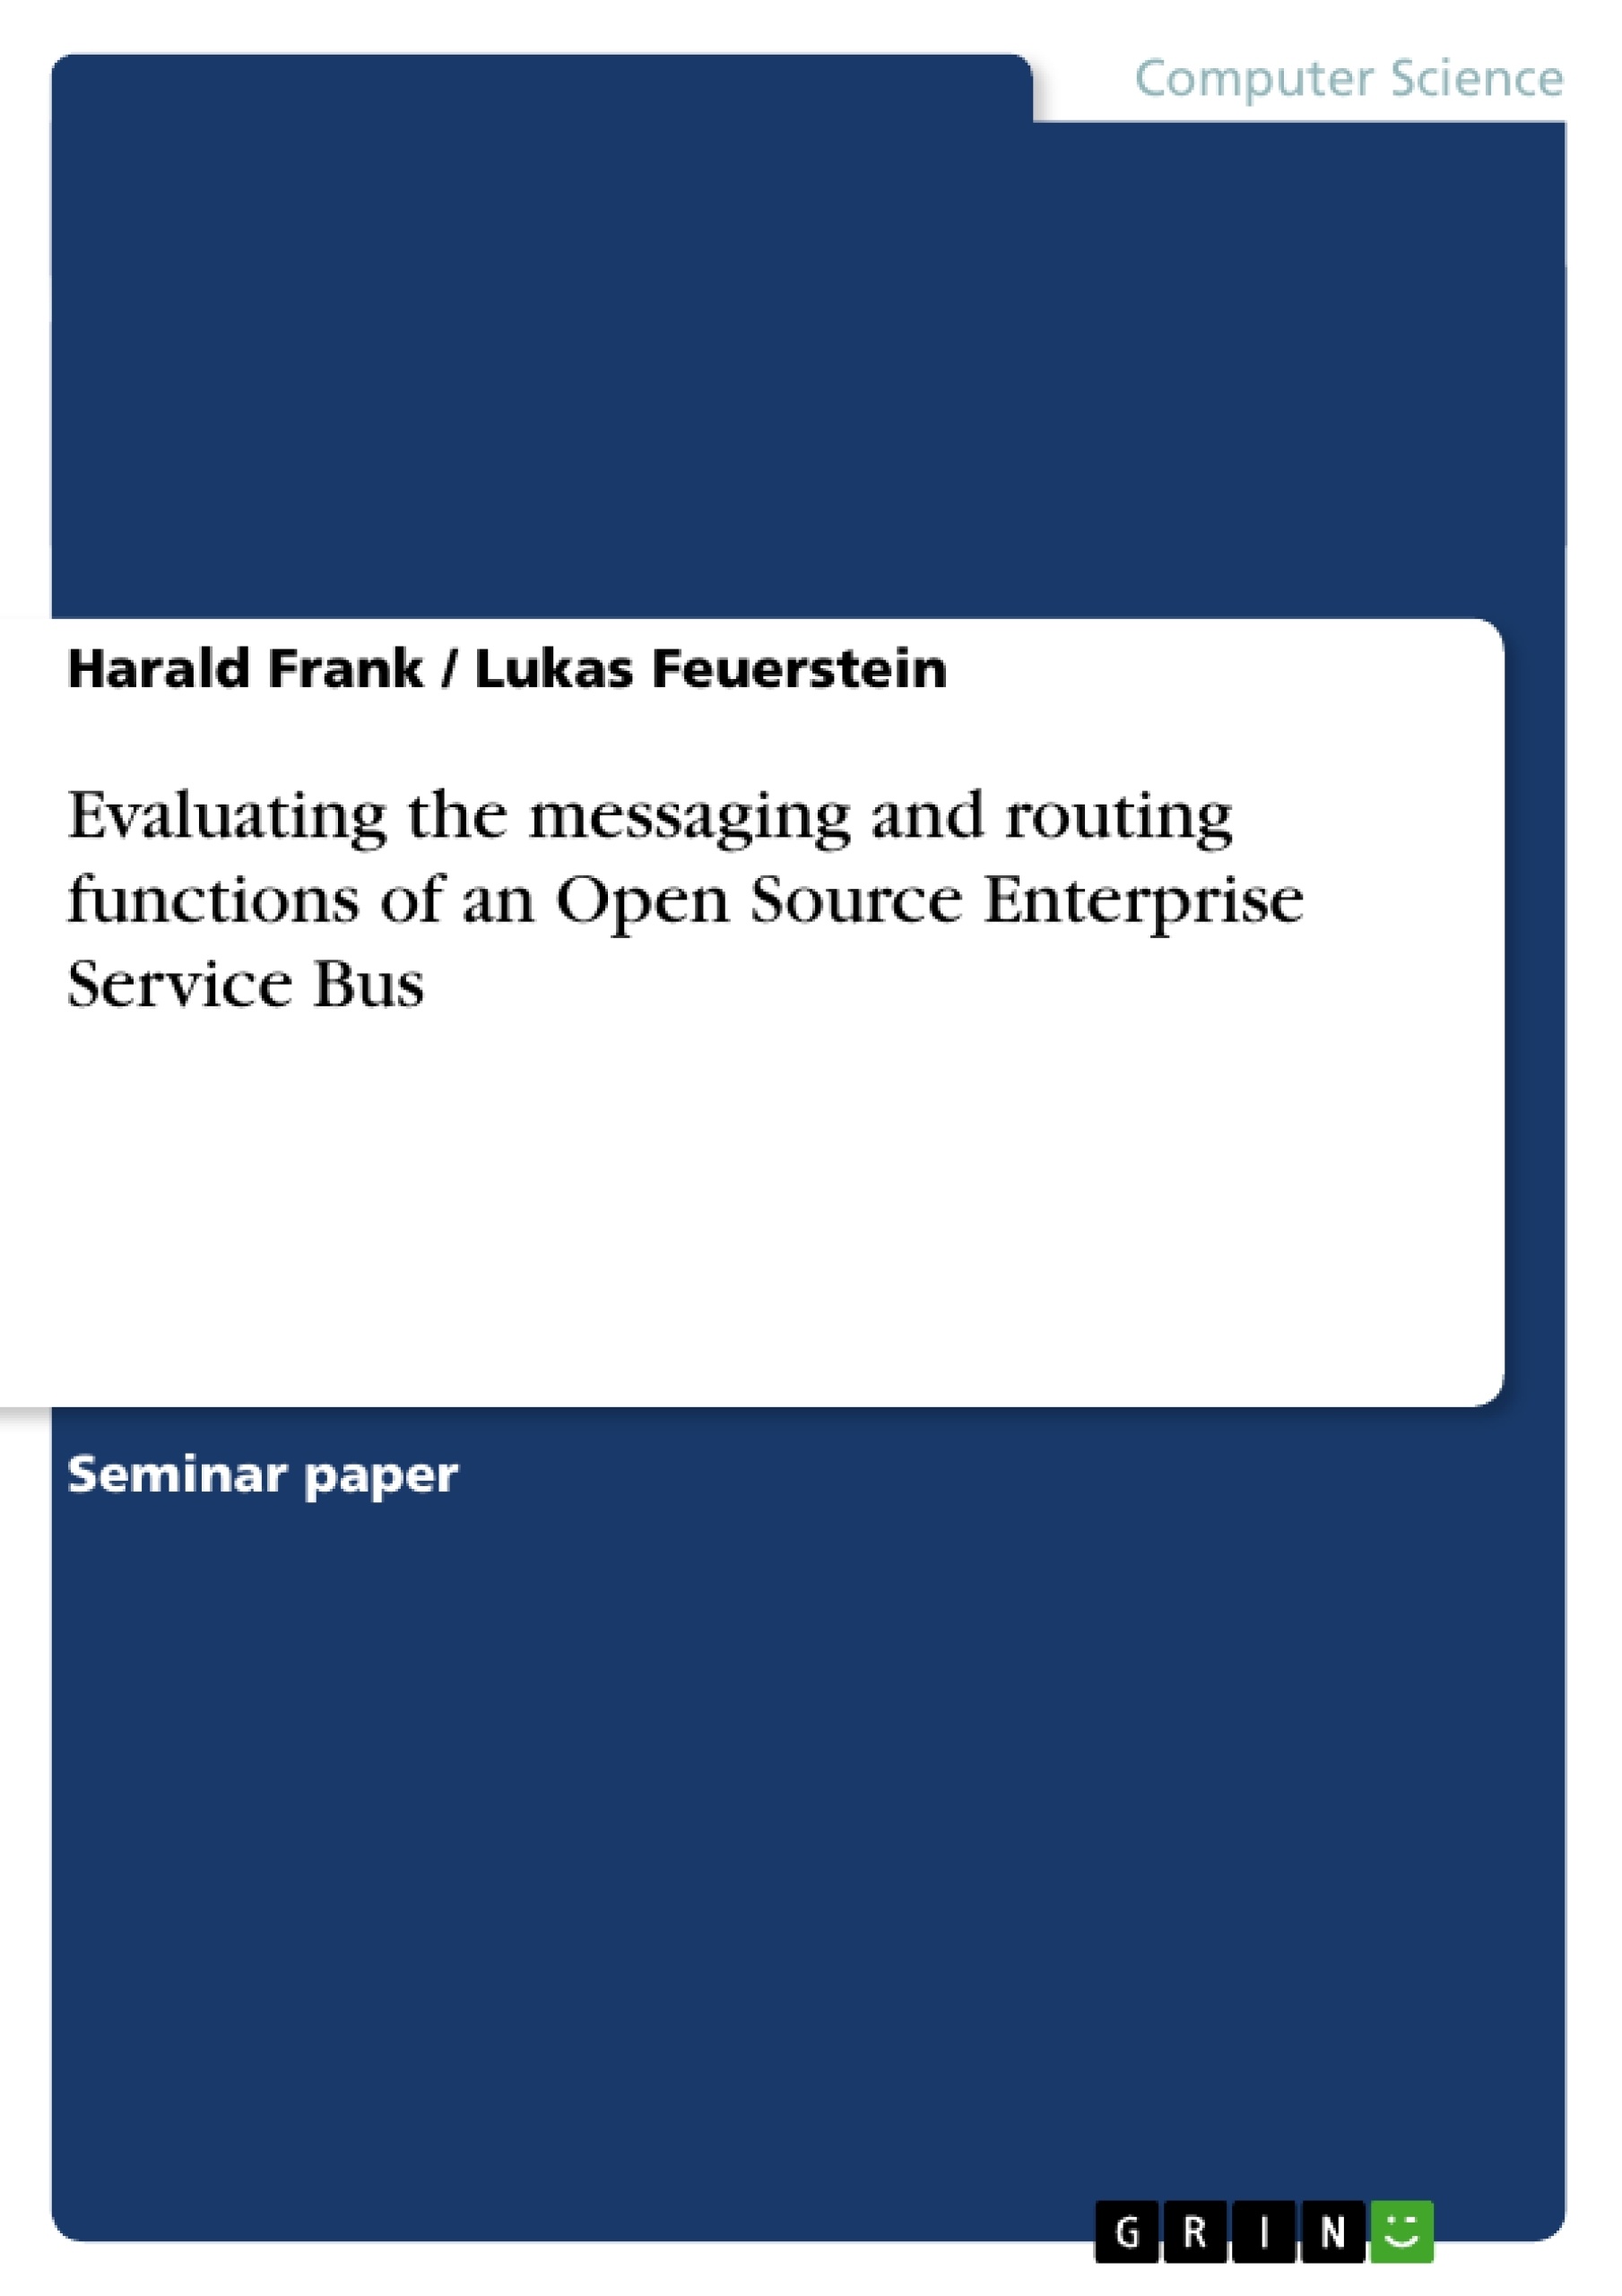 Title: Evaluating the messaging and routing functions of an Open Source Enterprise Service Bus